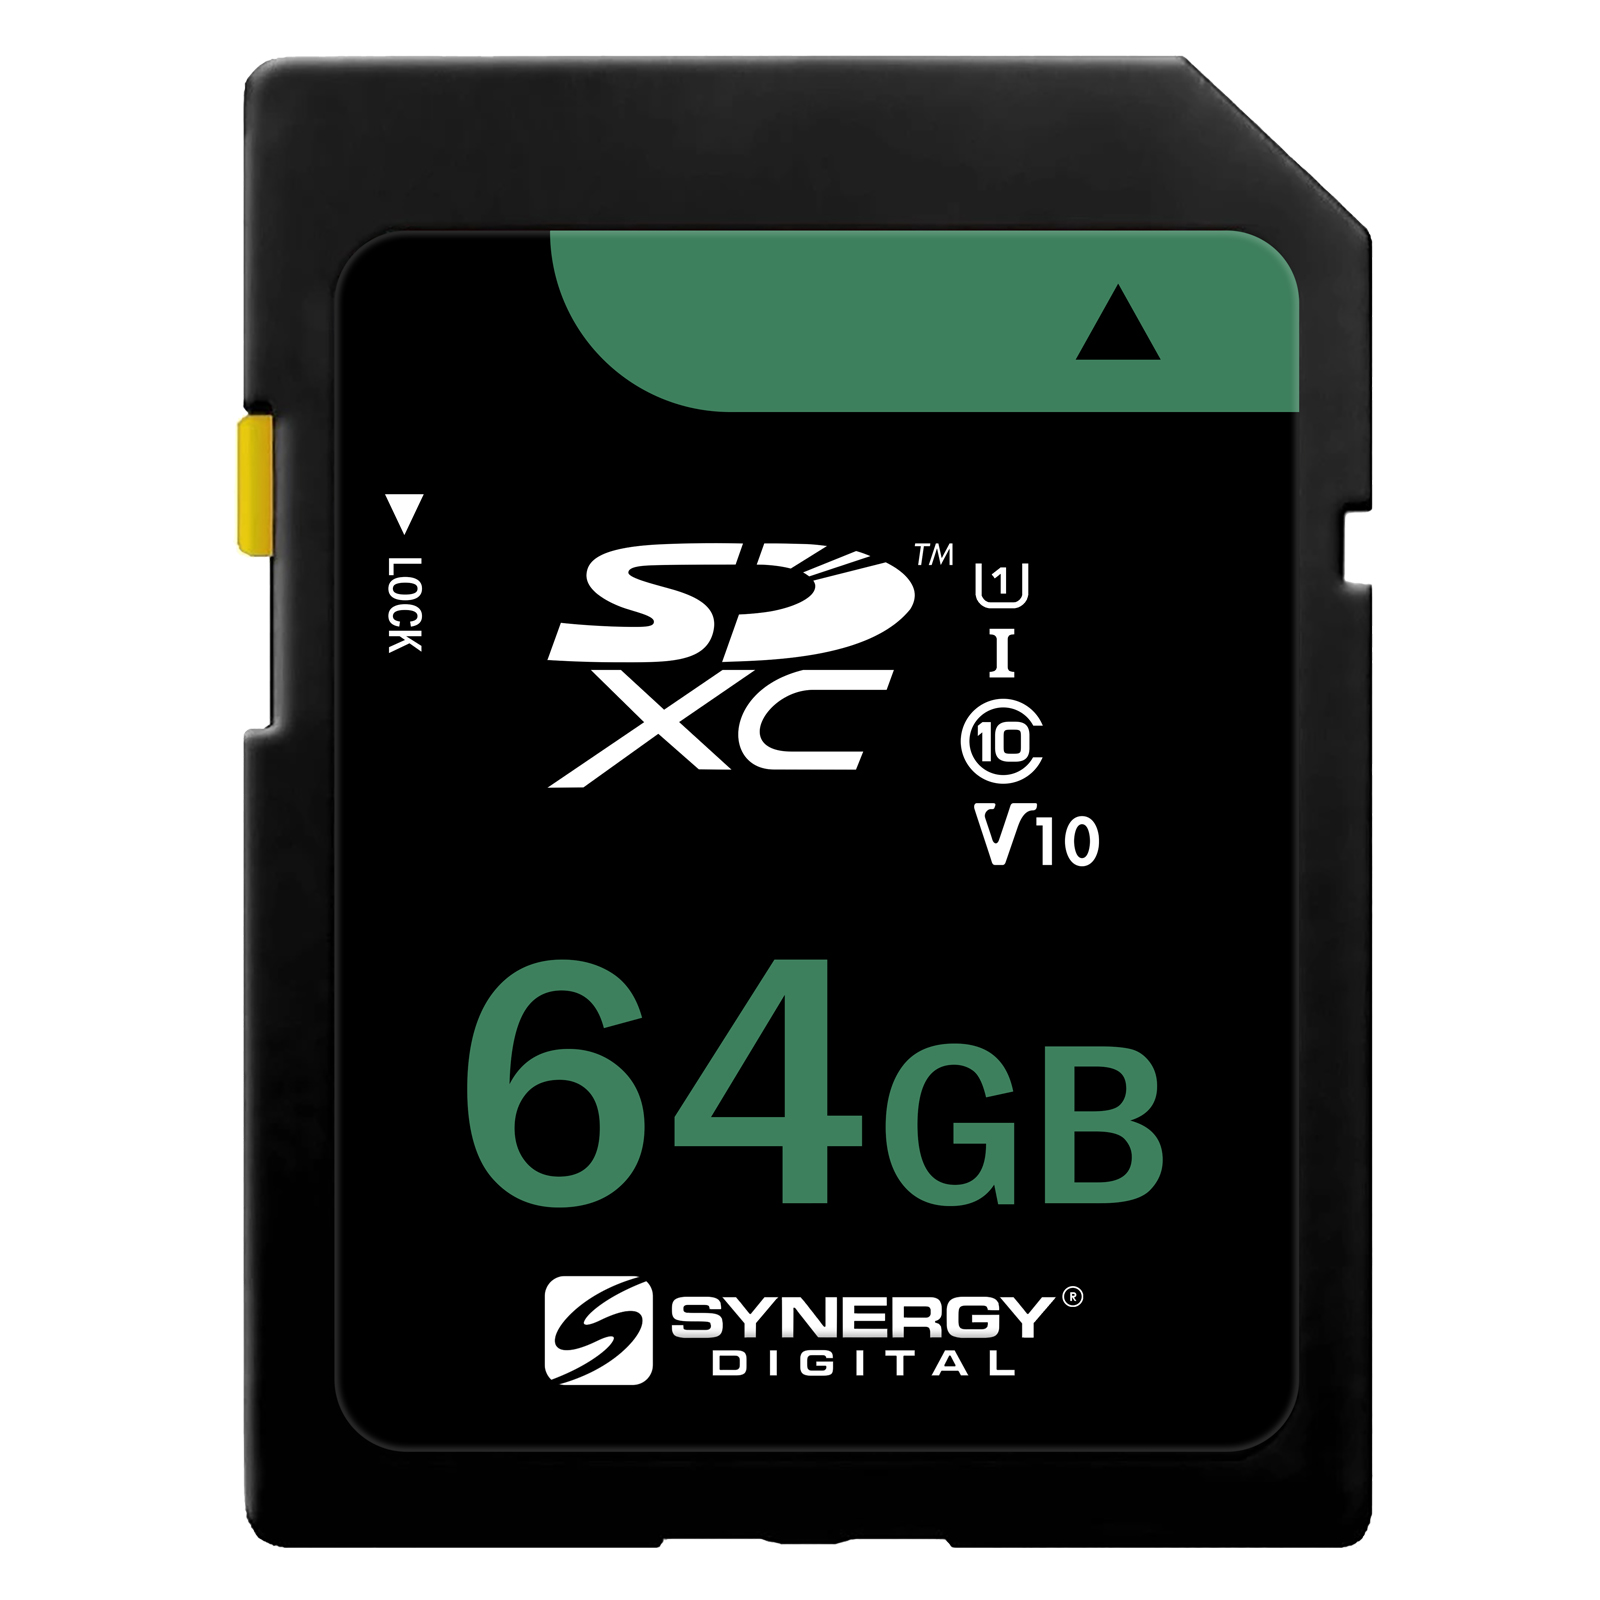 Memory Cards for Spy XCEL 720 Camcorder